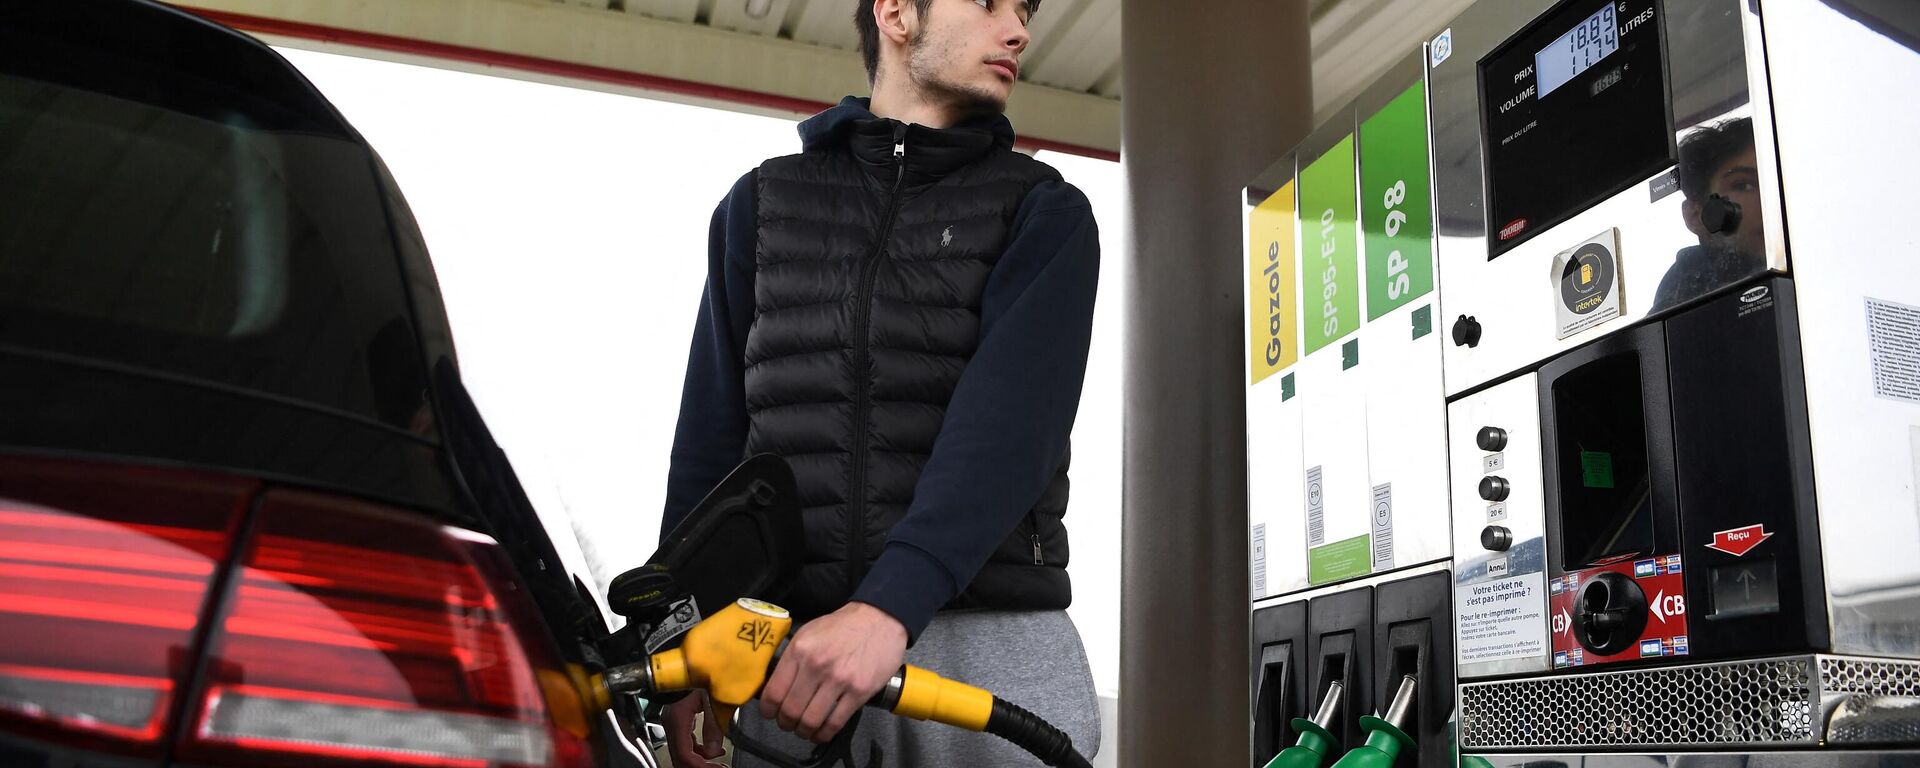 A driver fills his car tank at a petrol station in Ploneis, western France, on January 18, 2022, as oil prices are at their highest since 2014.  - Sputnik International, 1920, 18.01.2022